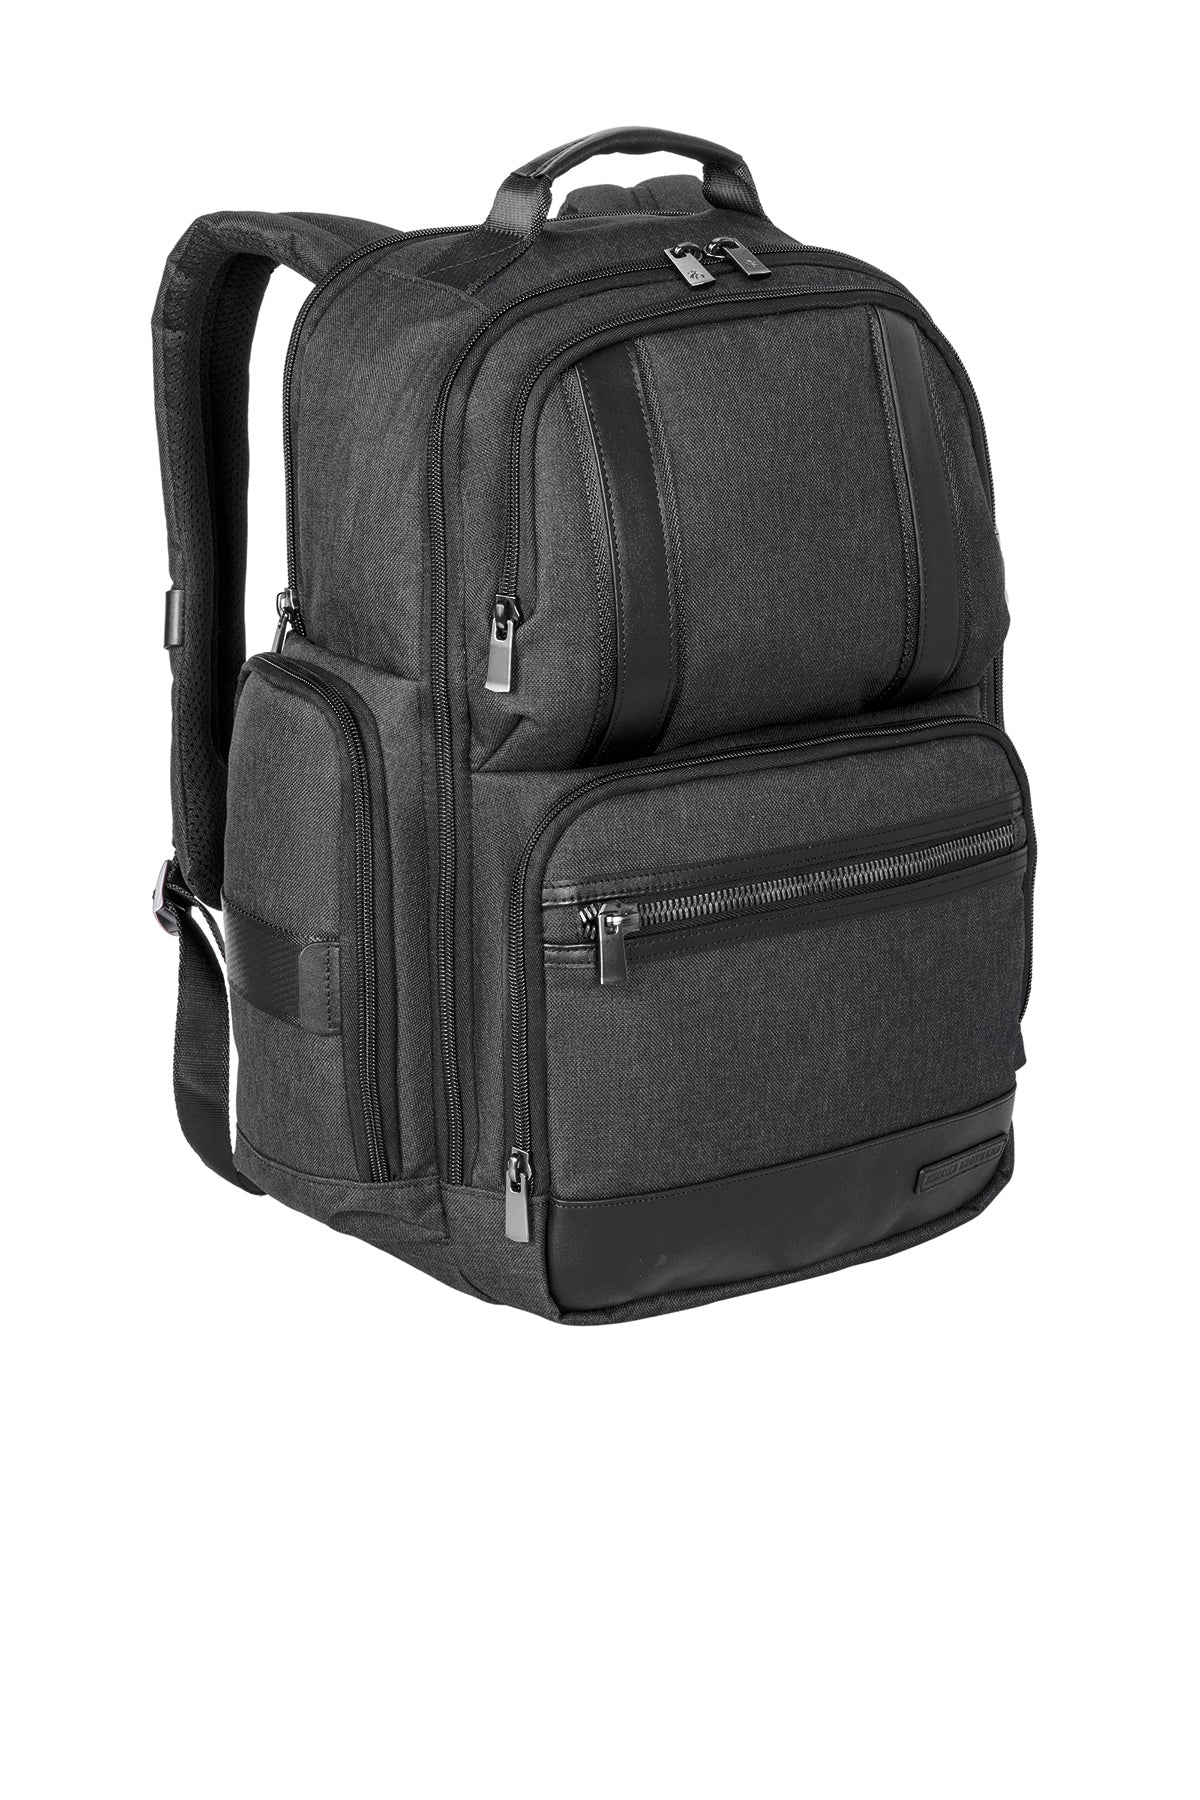 Brooks Brothers Grant Backpack, Heather Grey